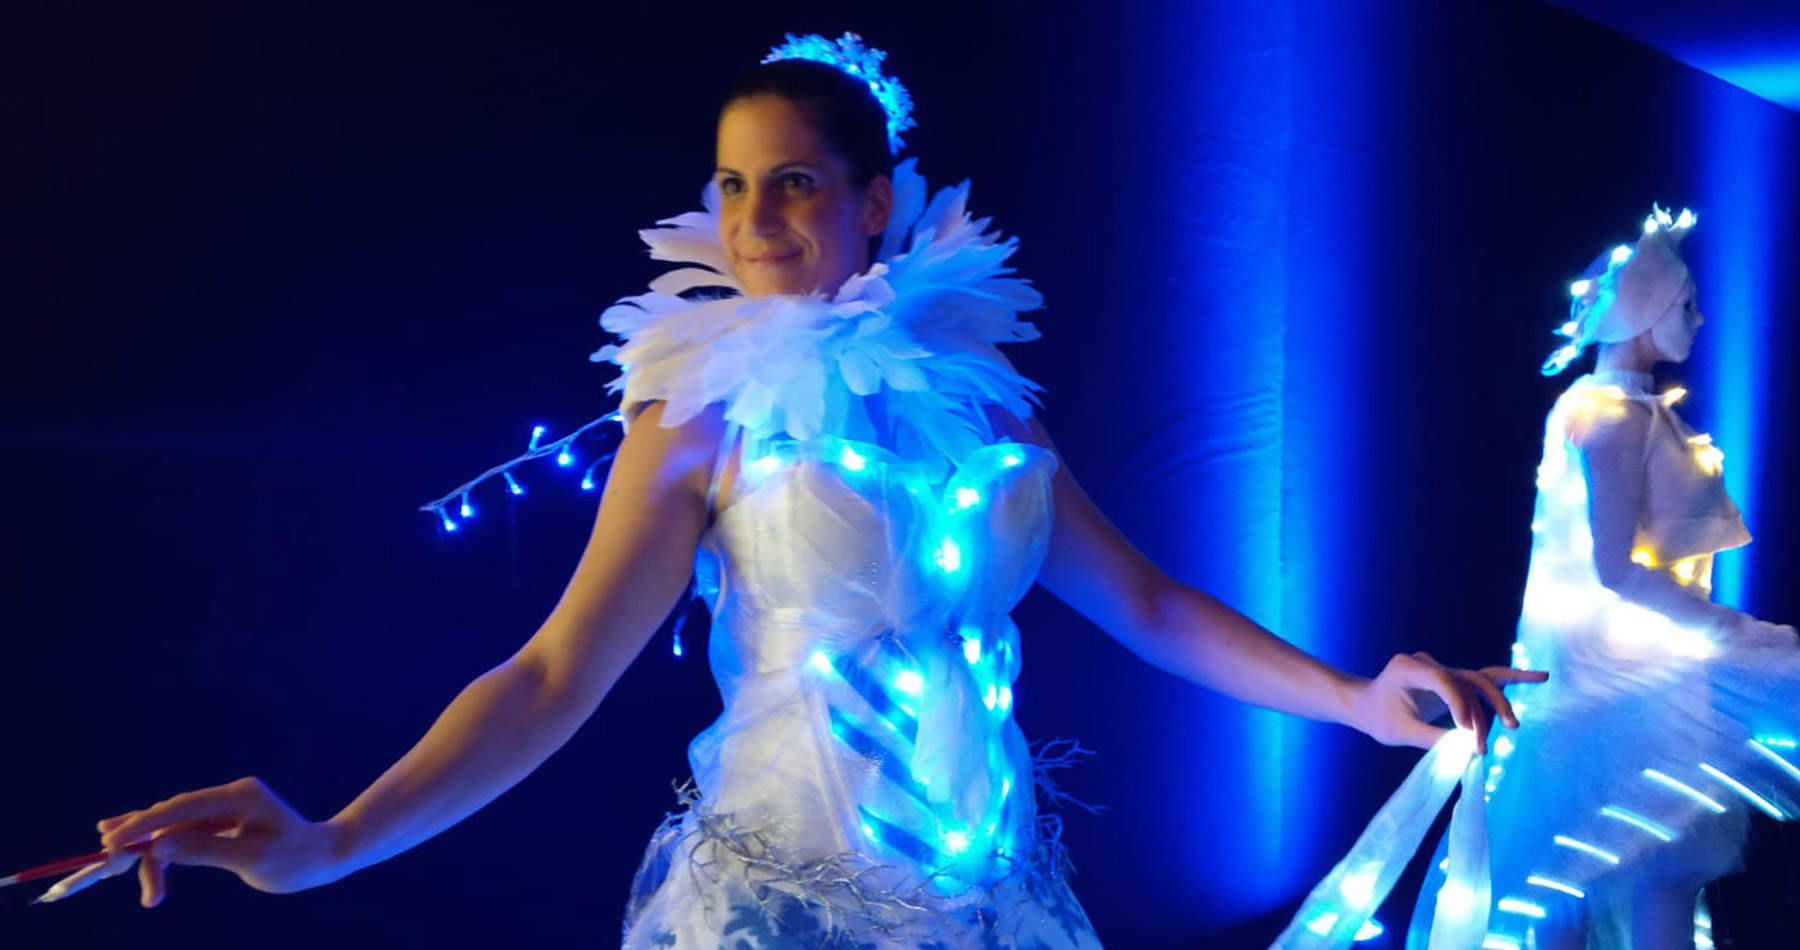 LED Figure at an event